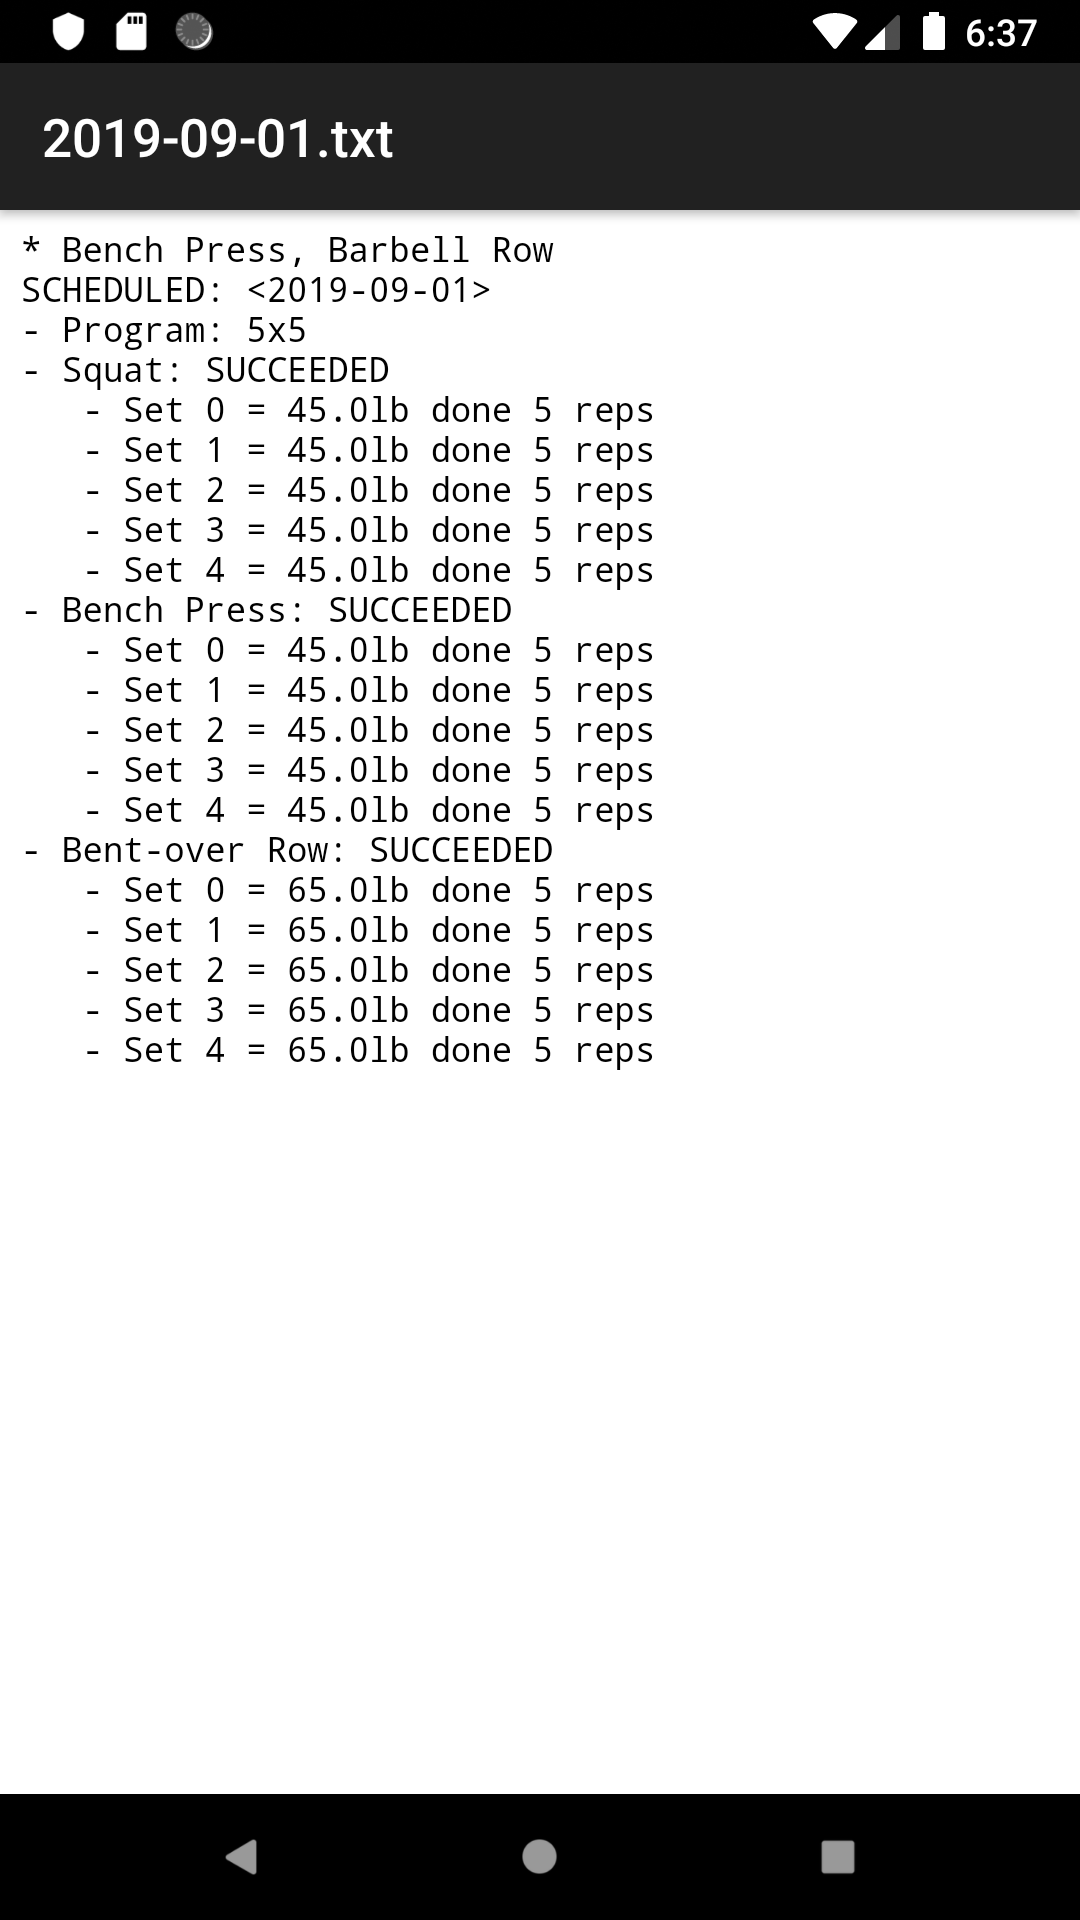 Workout log text file output from lift